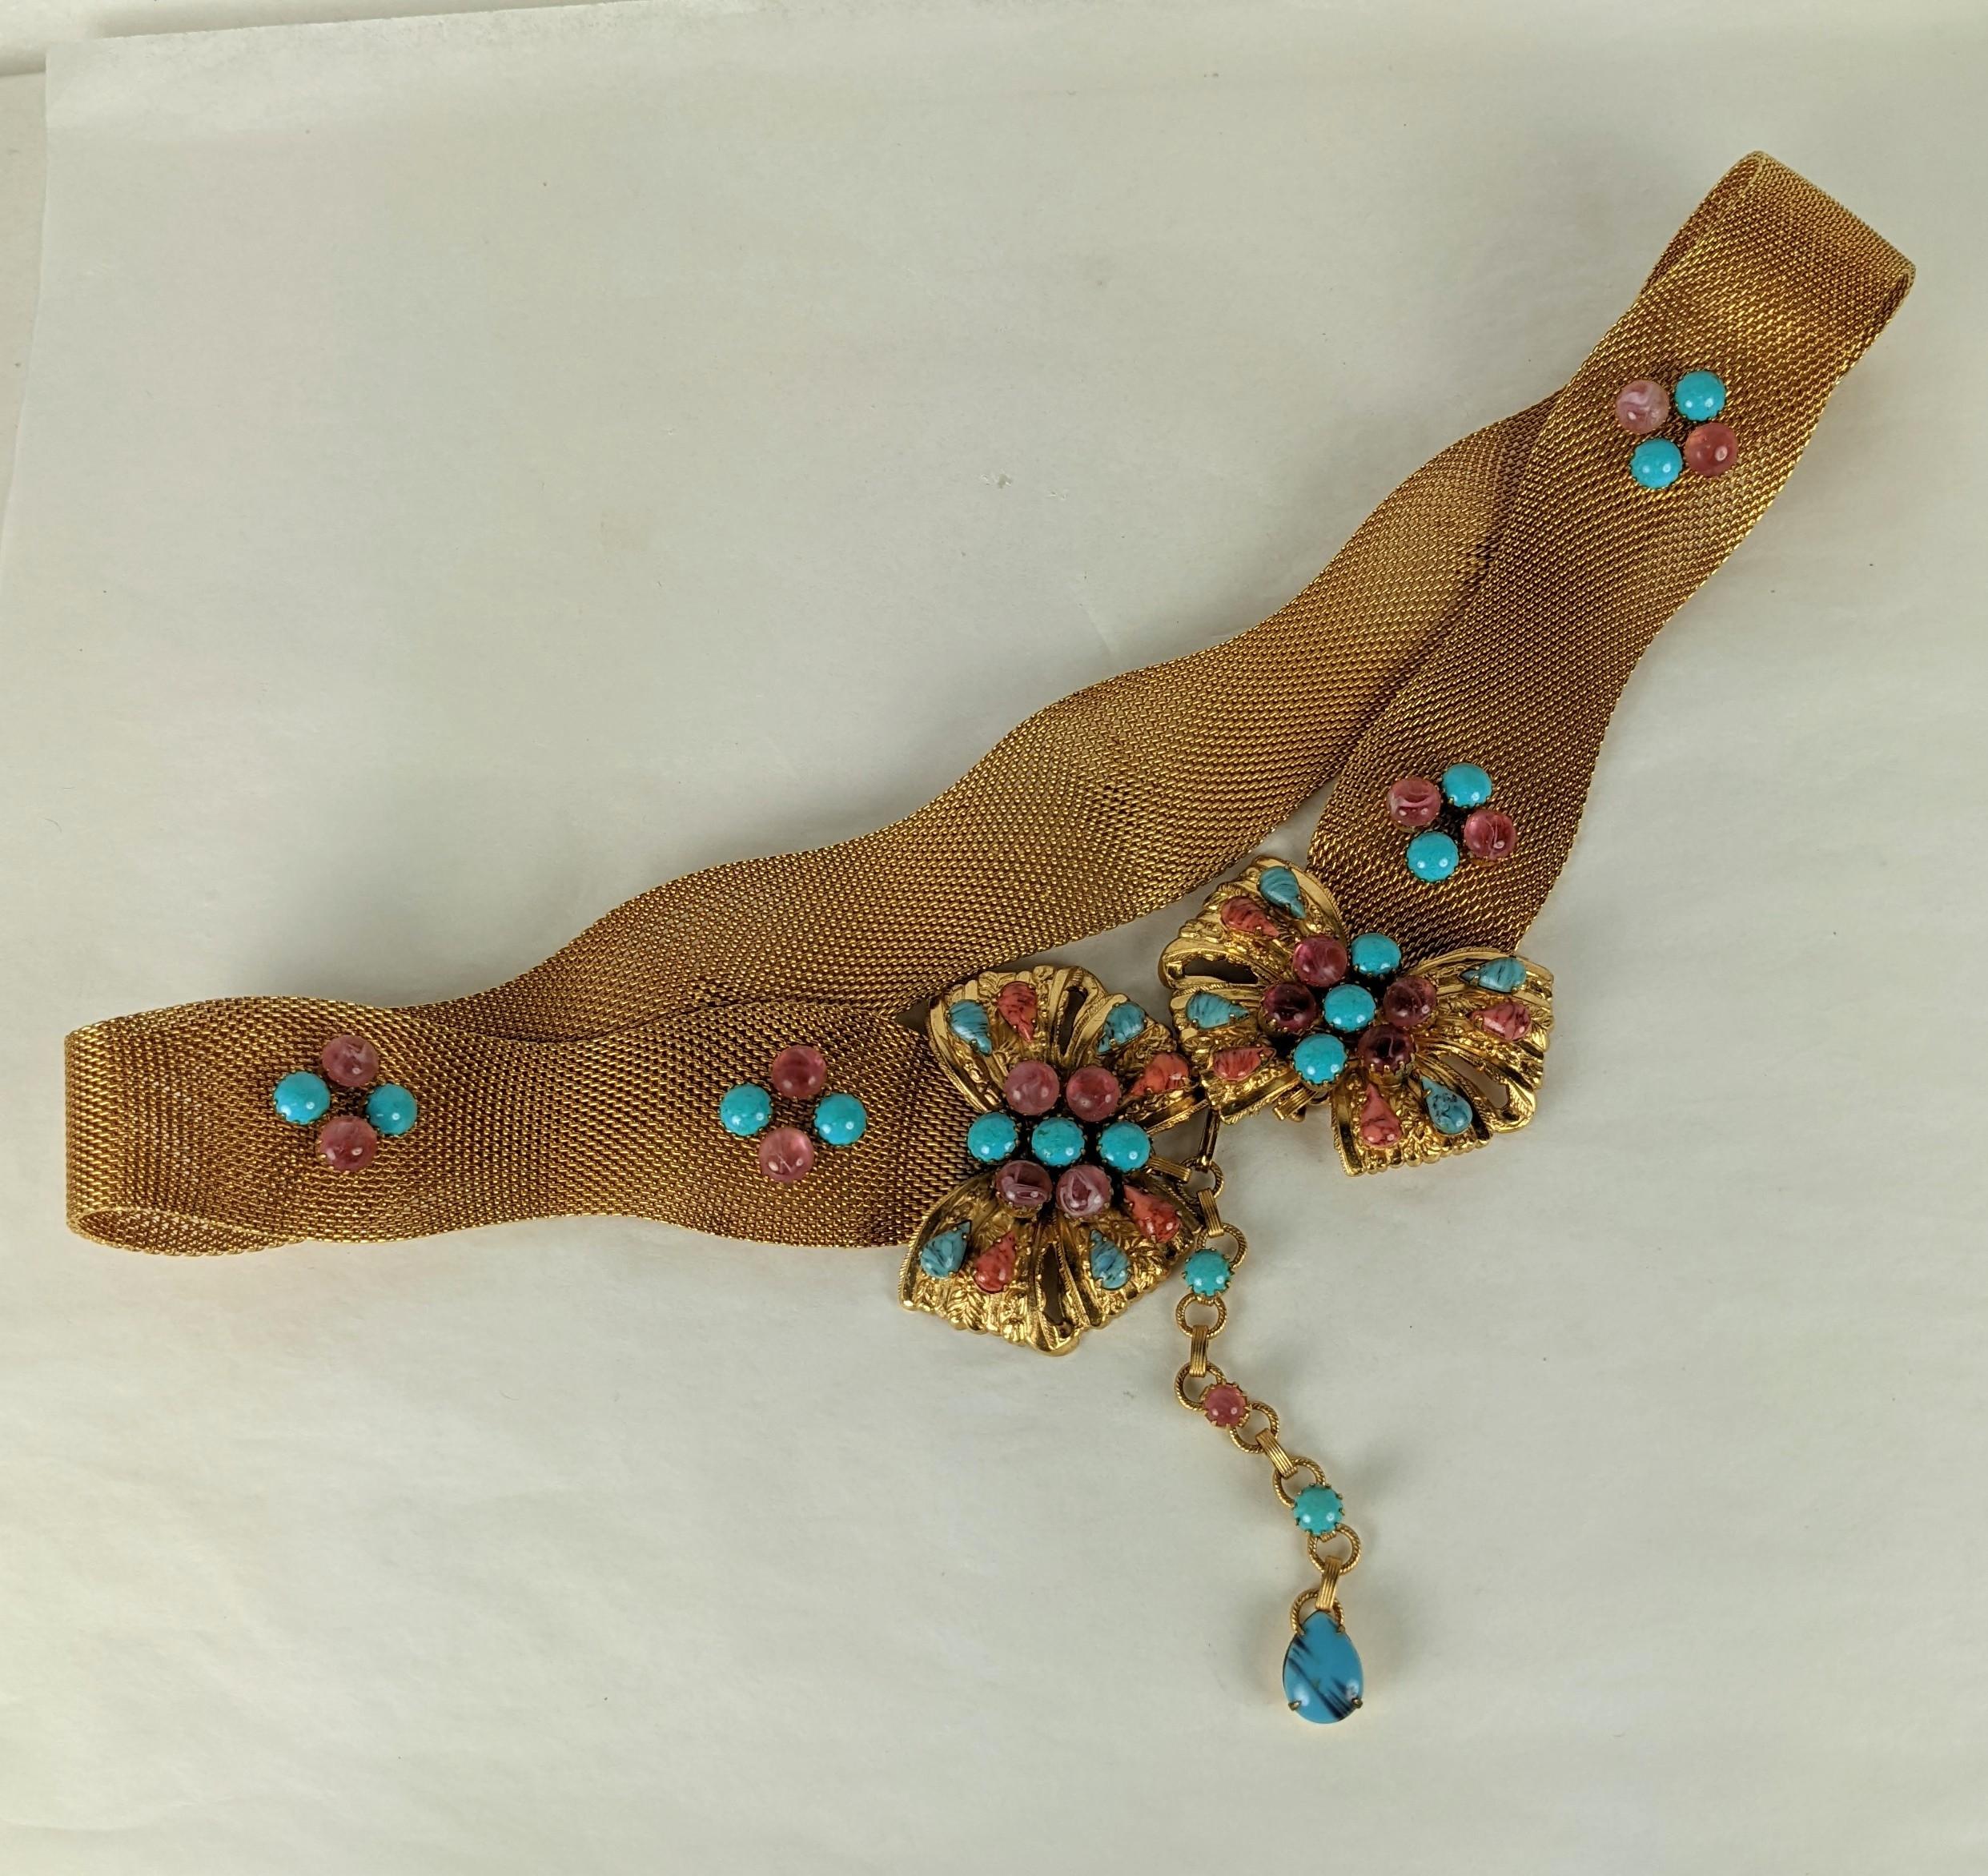 Exotic and striking Jeweled Belt from the 1960's by Original by Robert. Unusual wavy gold mesh chaining is set with pronged stones in pink and faux turquoise with the addition of round cabs in real turquoise. Perfect to upgrade a simple shirt dress